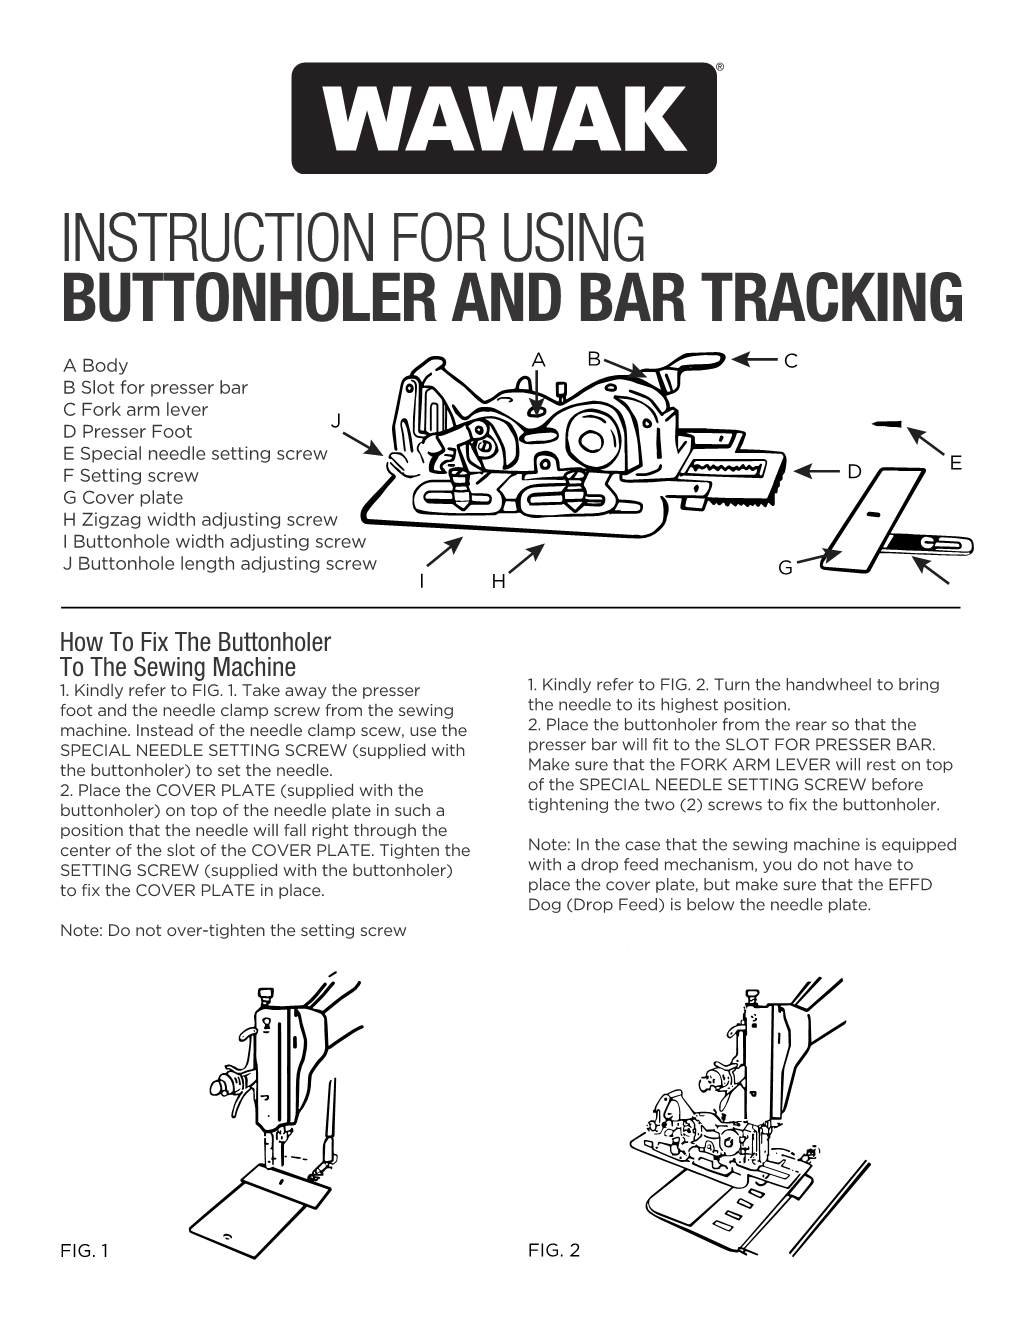 Instruction for Using Buttonholer and Bar Tracking